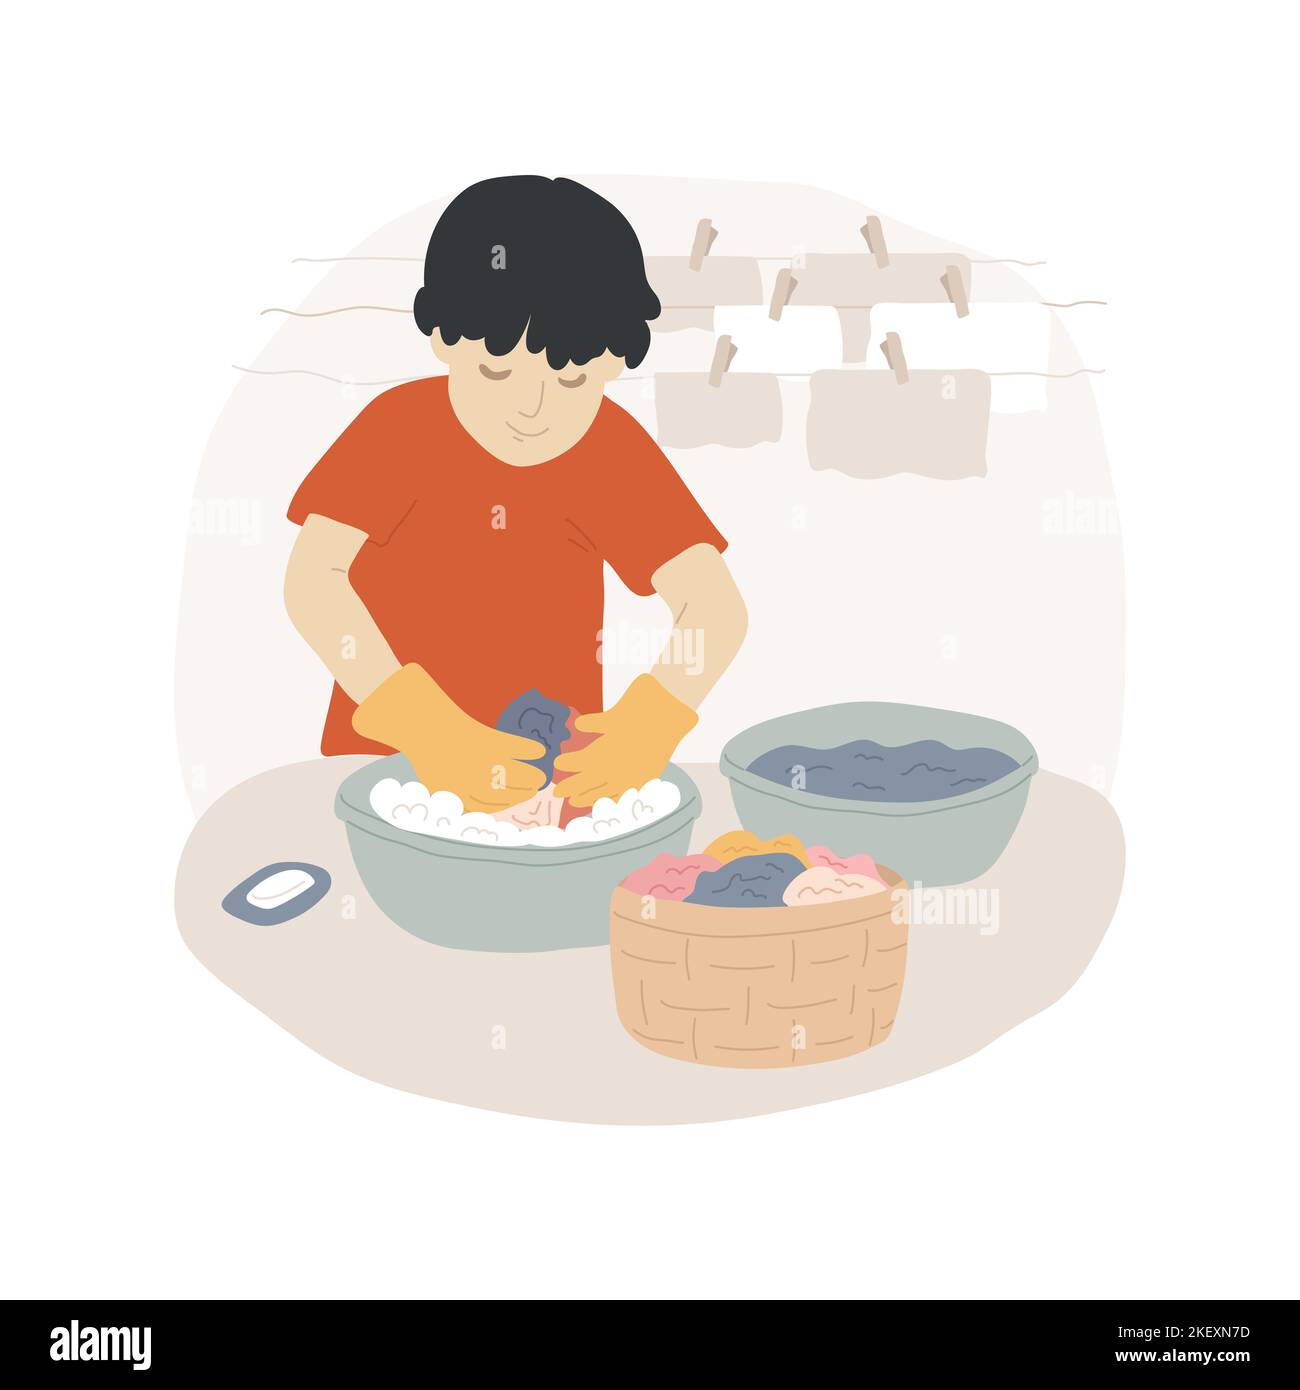 https://c8.alamy.com/comp/2KEXN7D/washing-clothes-isolated-cartoon-vector-illustration-kid-washing-clothes-in-a-bucket-montessori-practical-life-skill-hanging-tissues-on-drying-rack-care-of-home-environment-vector-cartoon-2KEXN7D.jpg